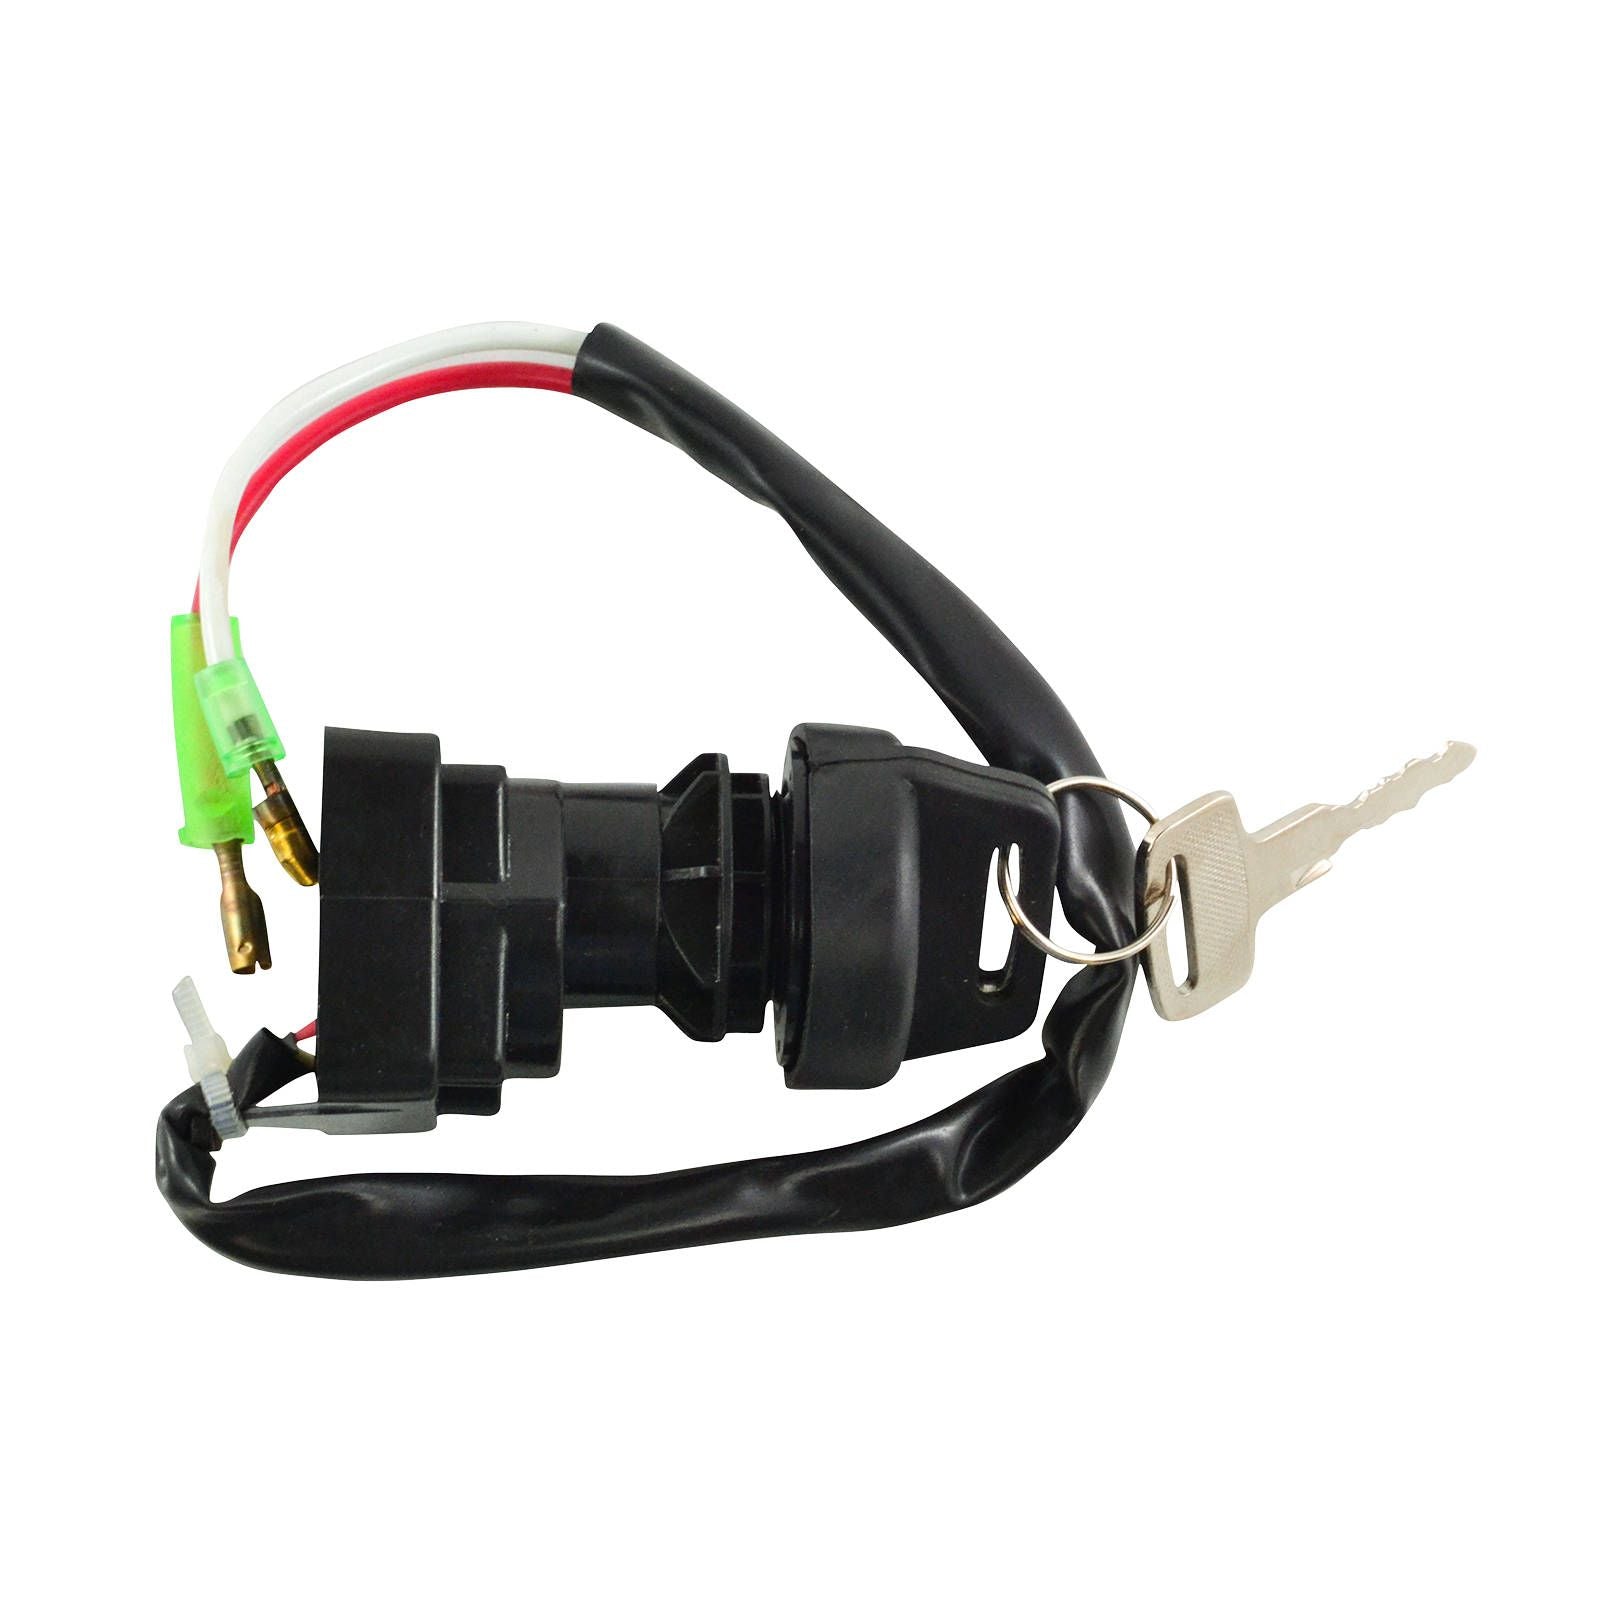 RMSTATOR 2-Position Ignition Key Switch - Assorted For Kawasaki Models #RMS05017